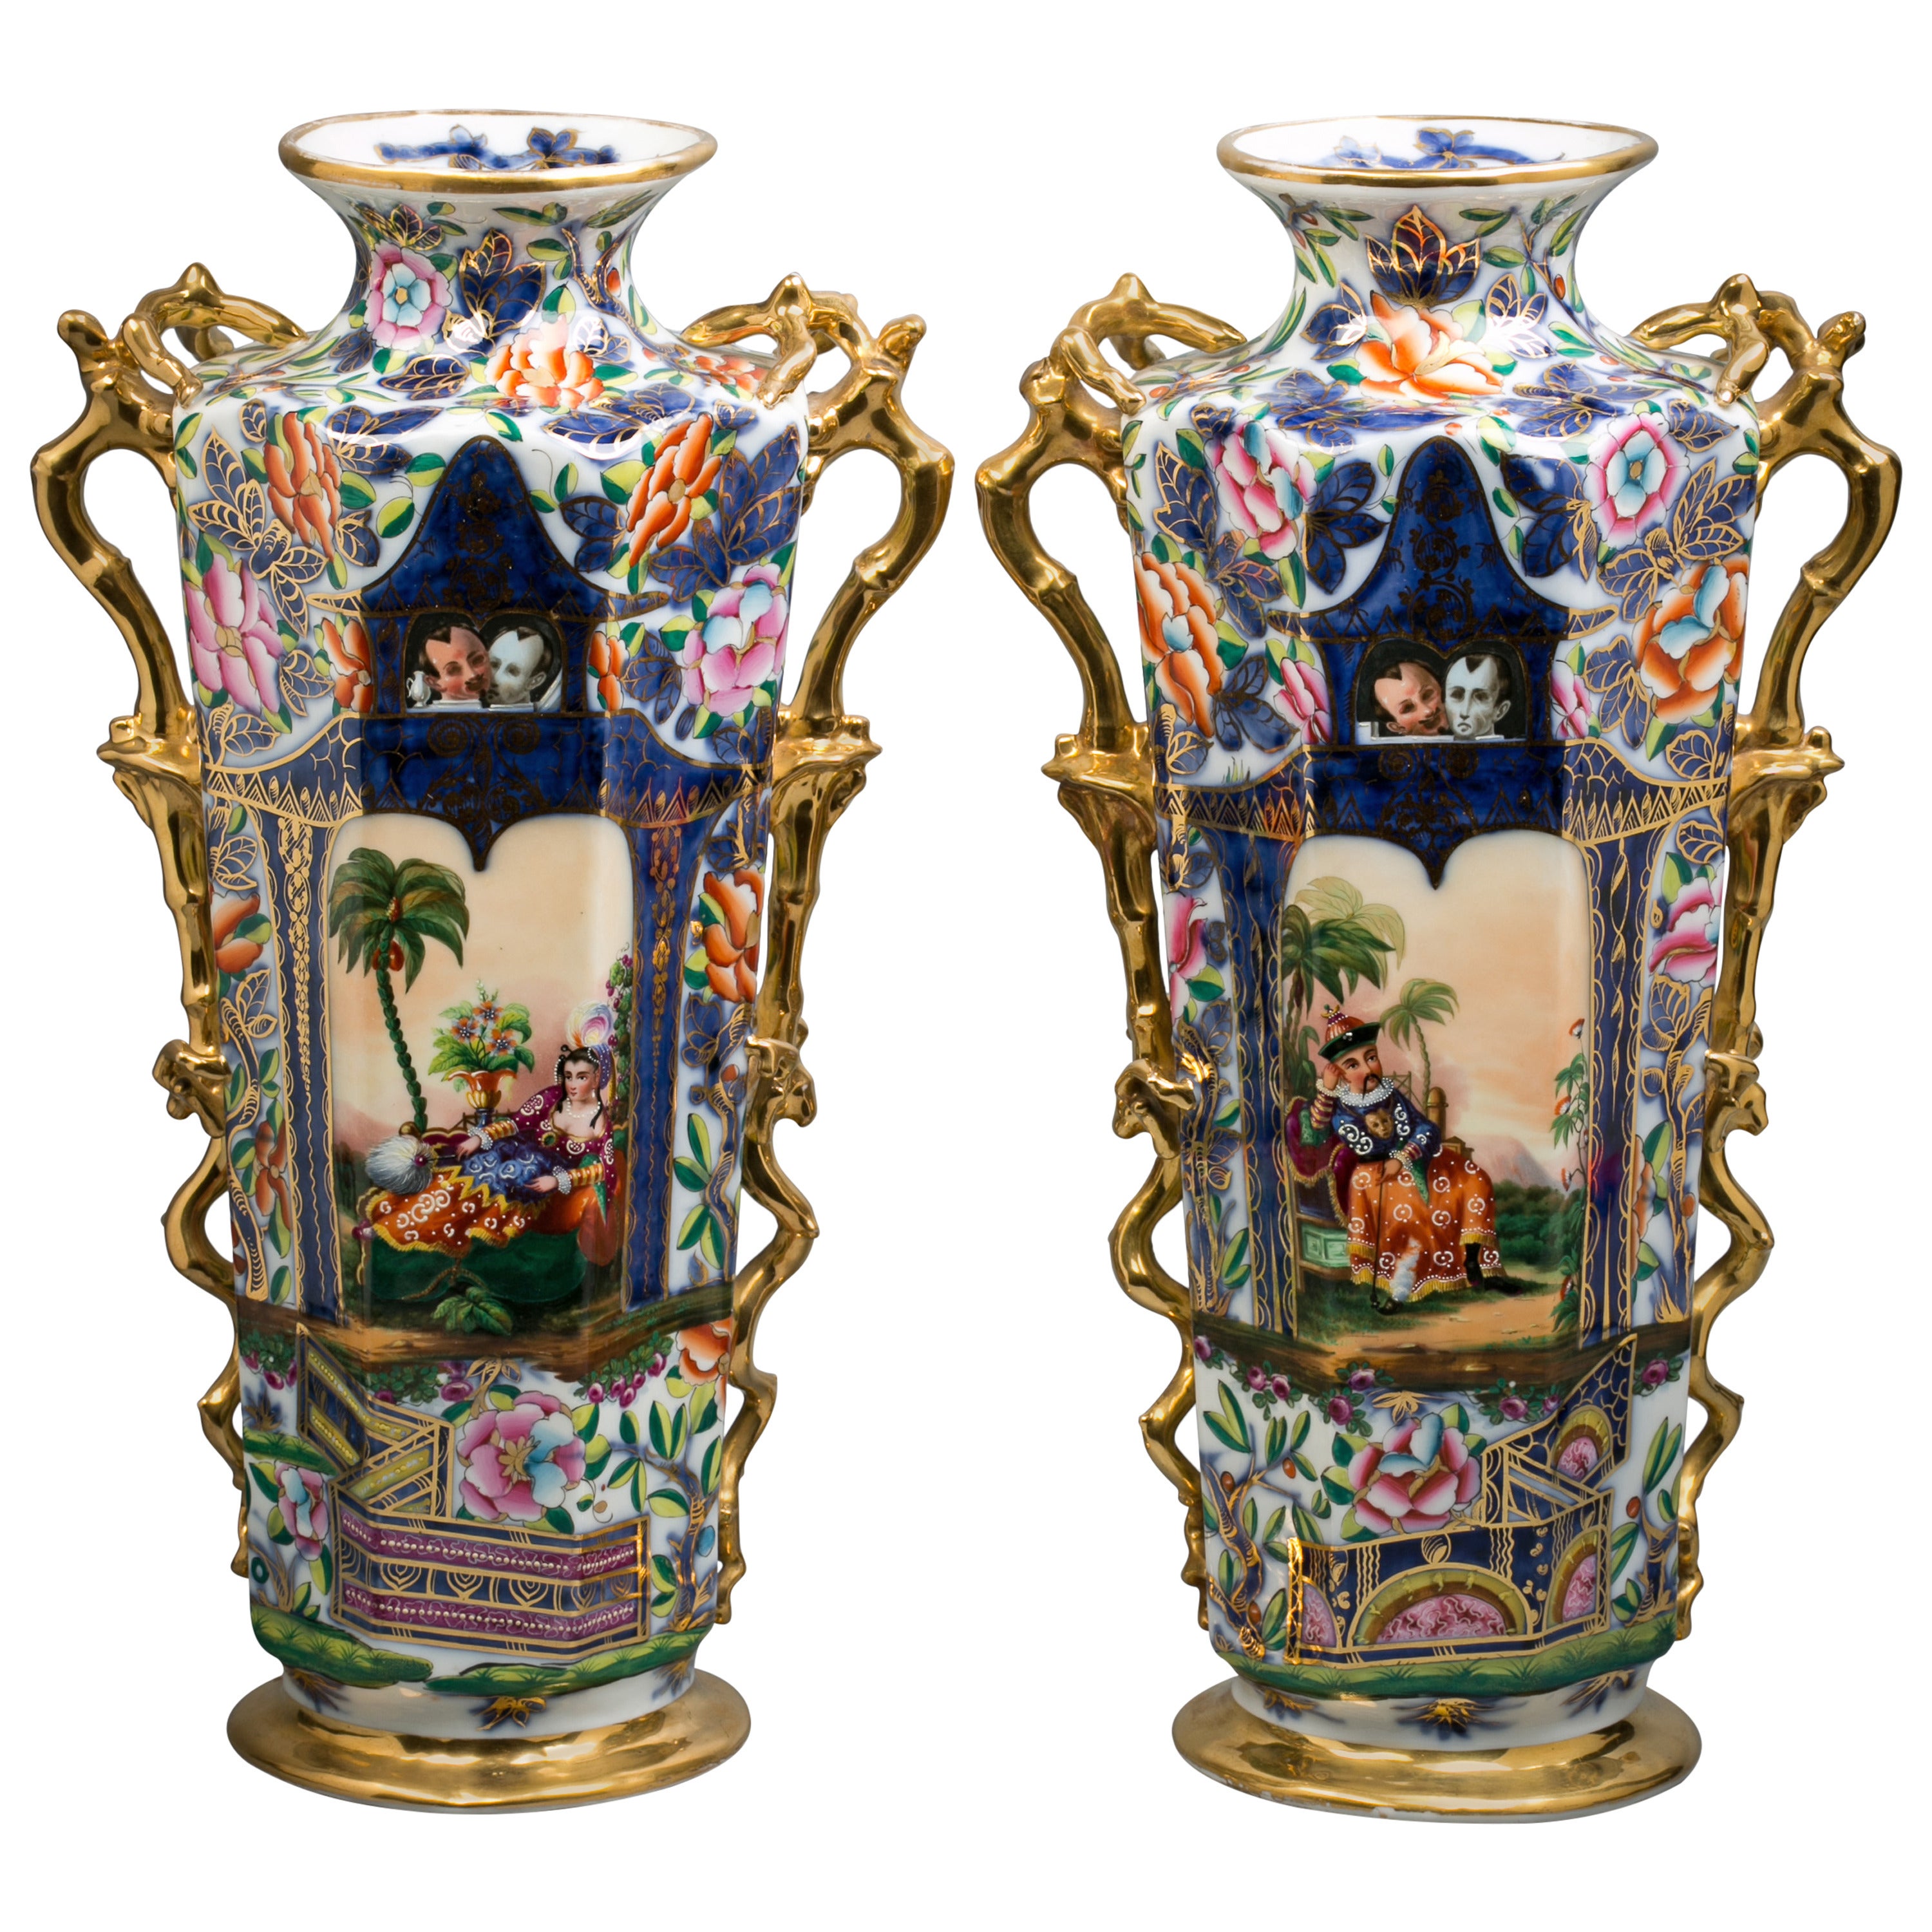 Pair of Paris Chinoiserie Vases, Bayeux Factory, circa 1840